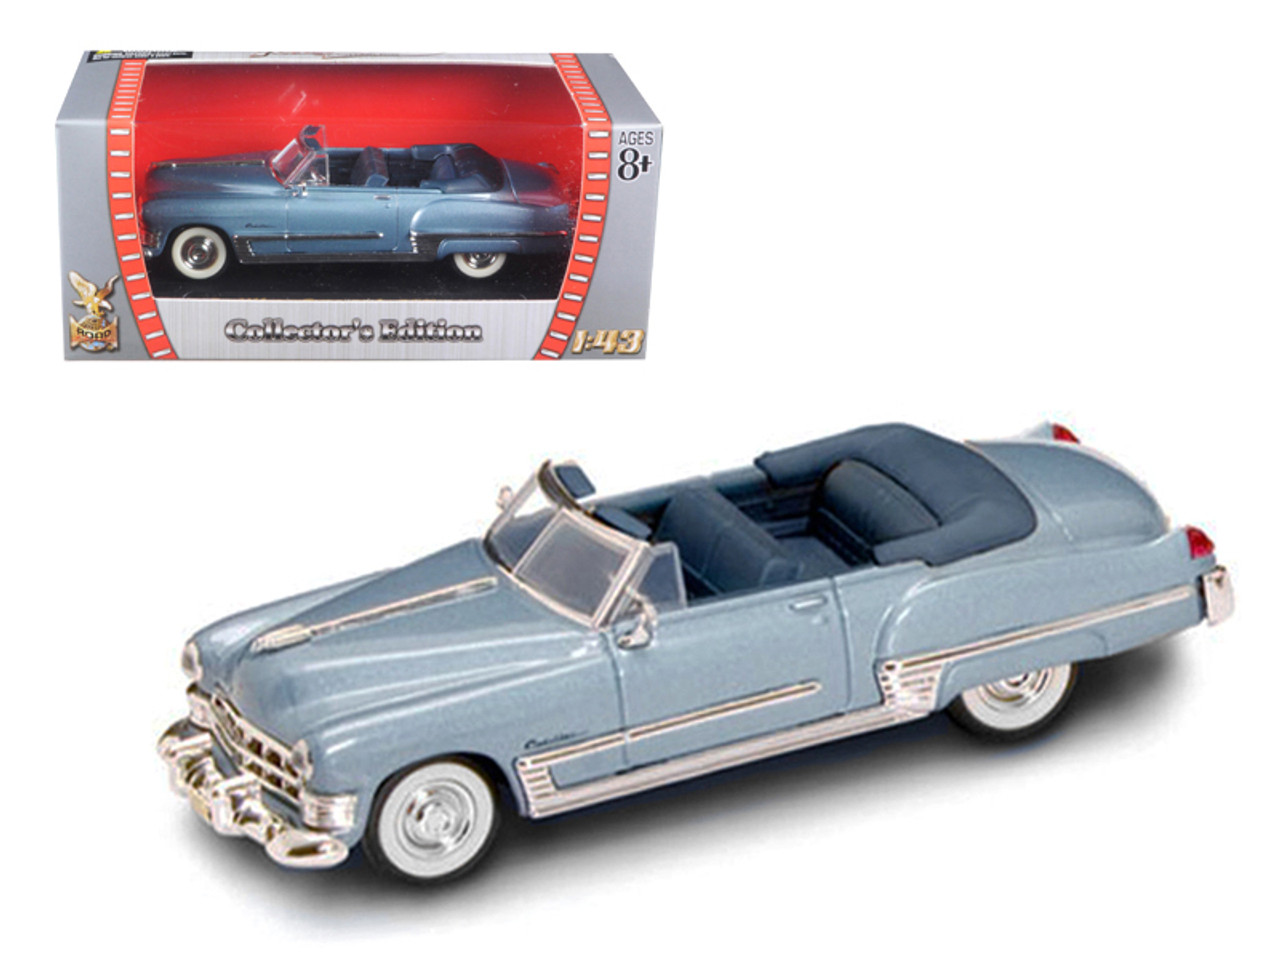 1949 Cadillac Coupe DeVille Convertible Blue Metallic 1/43 Diecast Model Car by Road Signature